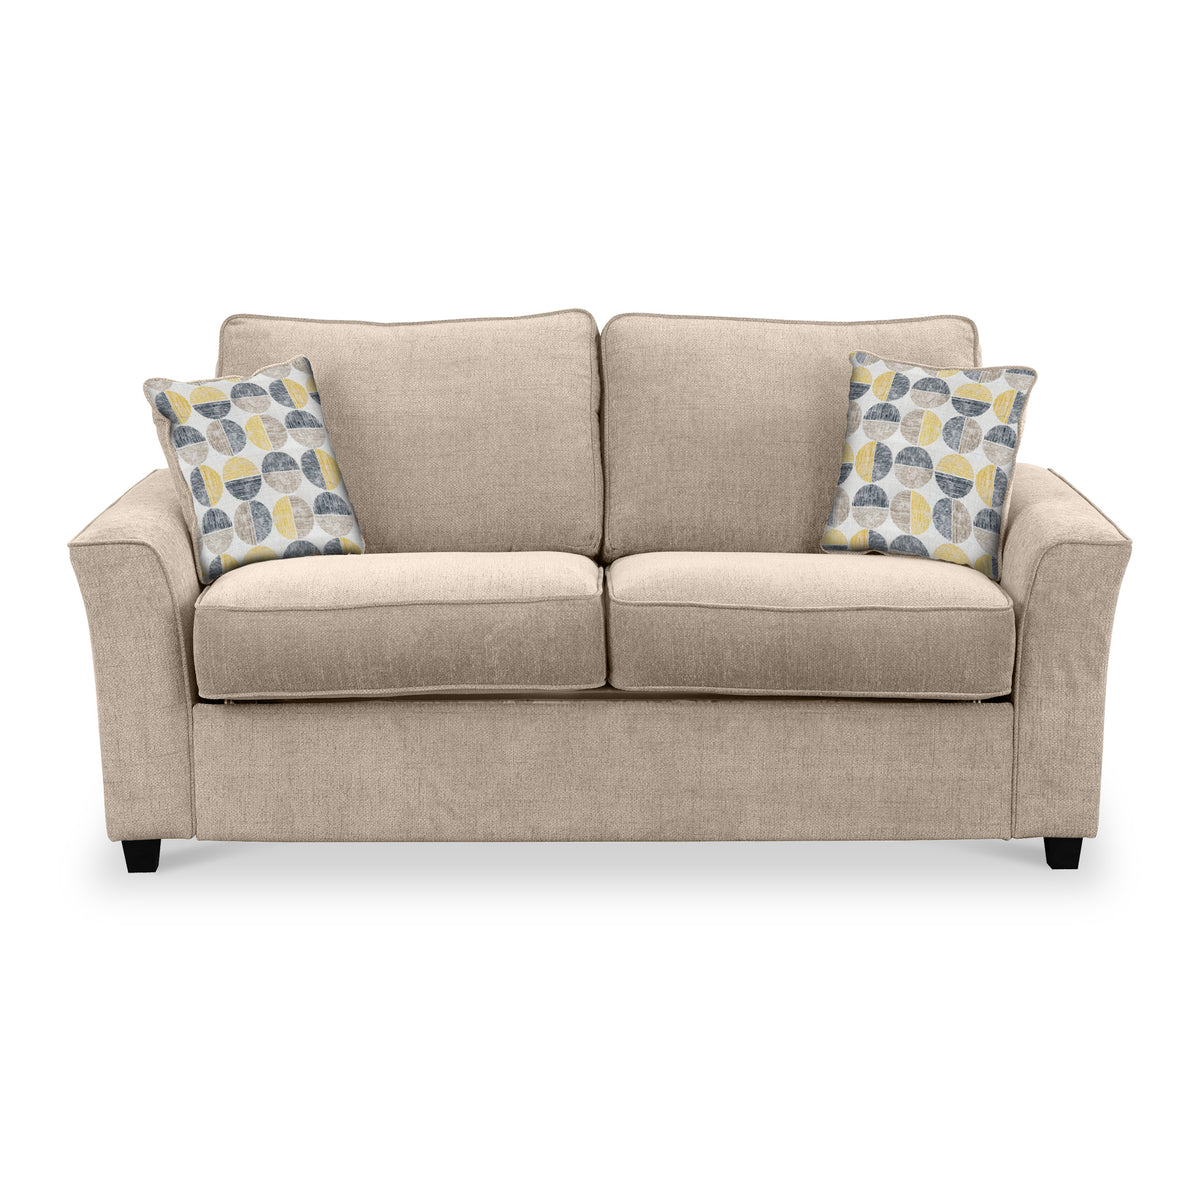 Abbott 2 Seater Sofabed in Oatmeal with Rufus Beige Cushions by Roseland Furniture